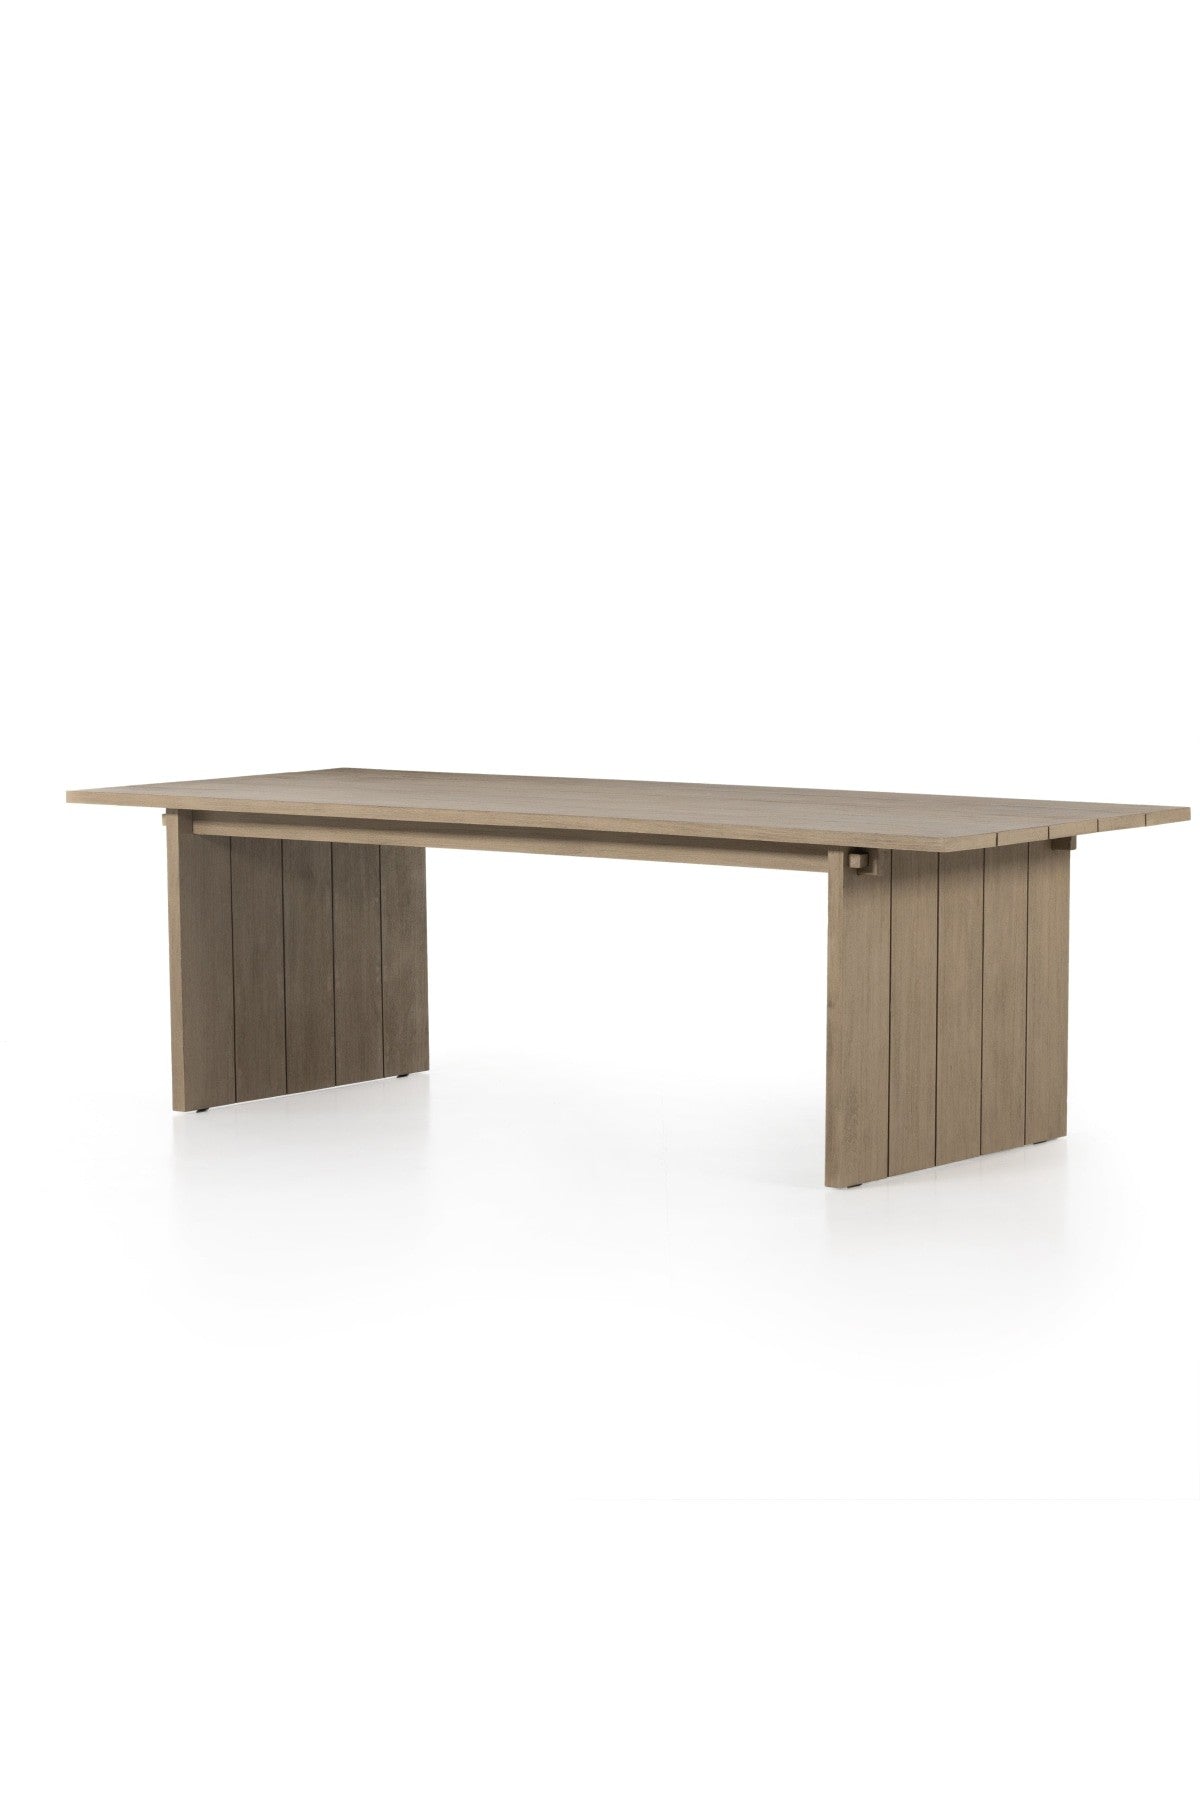 Melton Outdoor Dining Table